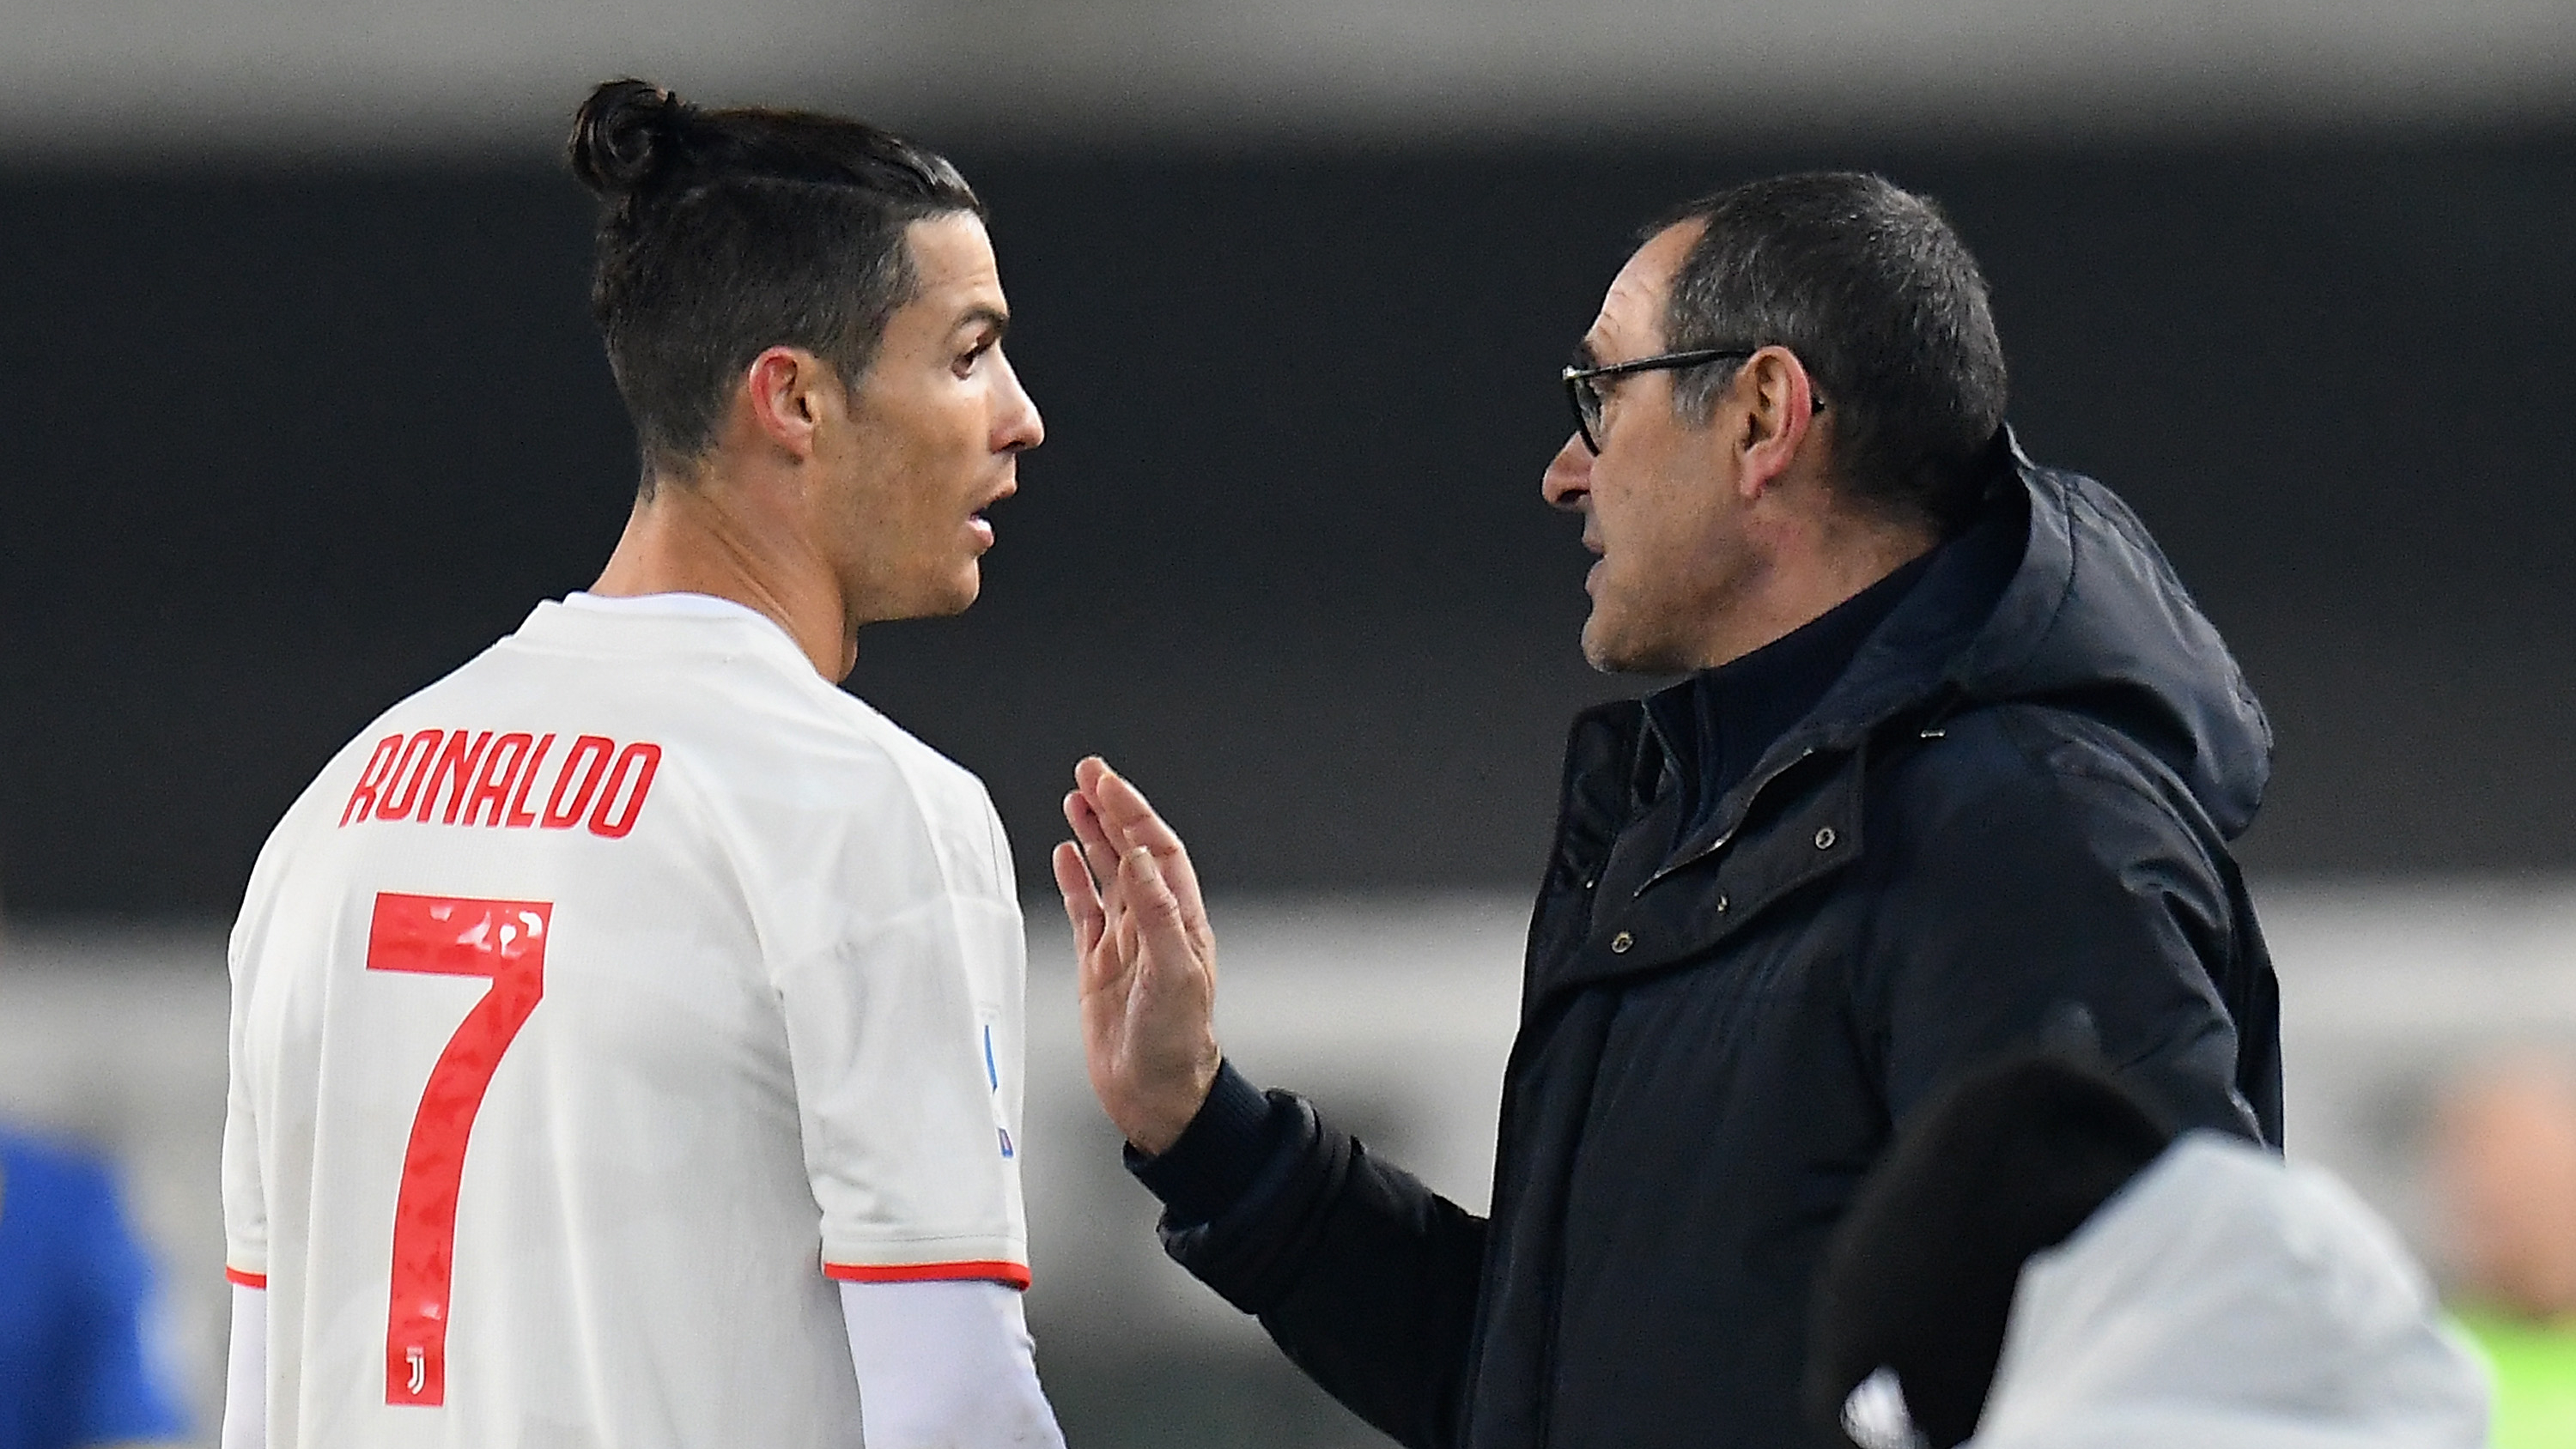 Juventus should give Ronaldo a 'gift' as he chases new milestones - Sarri